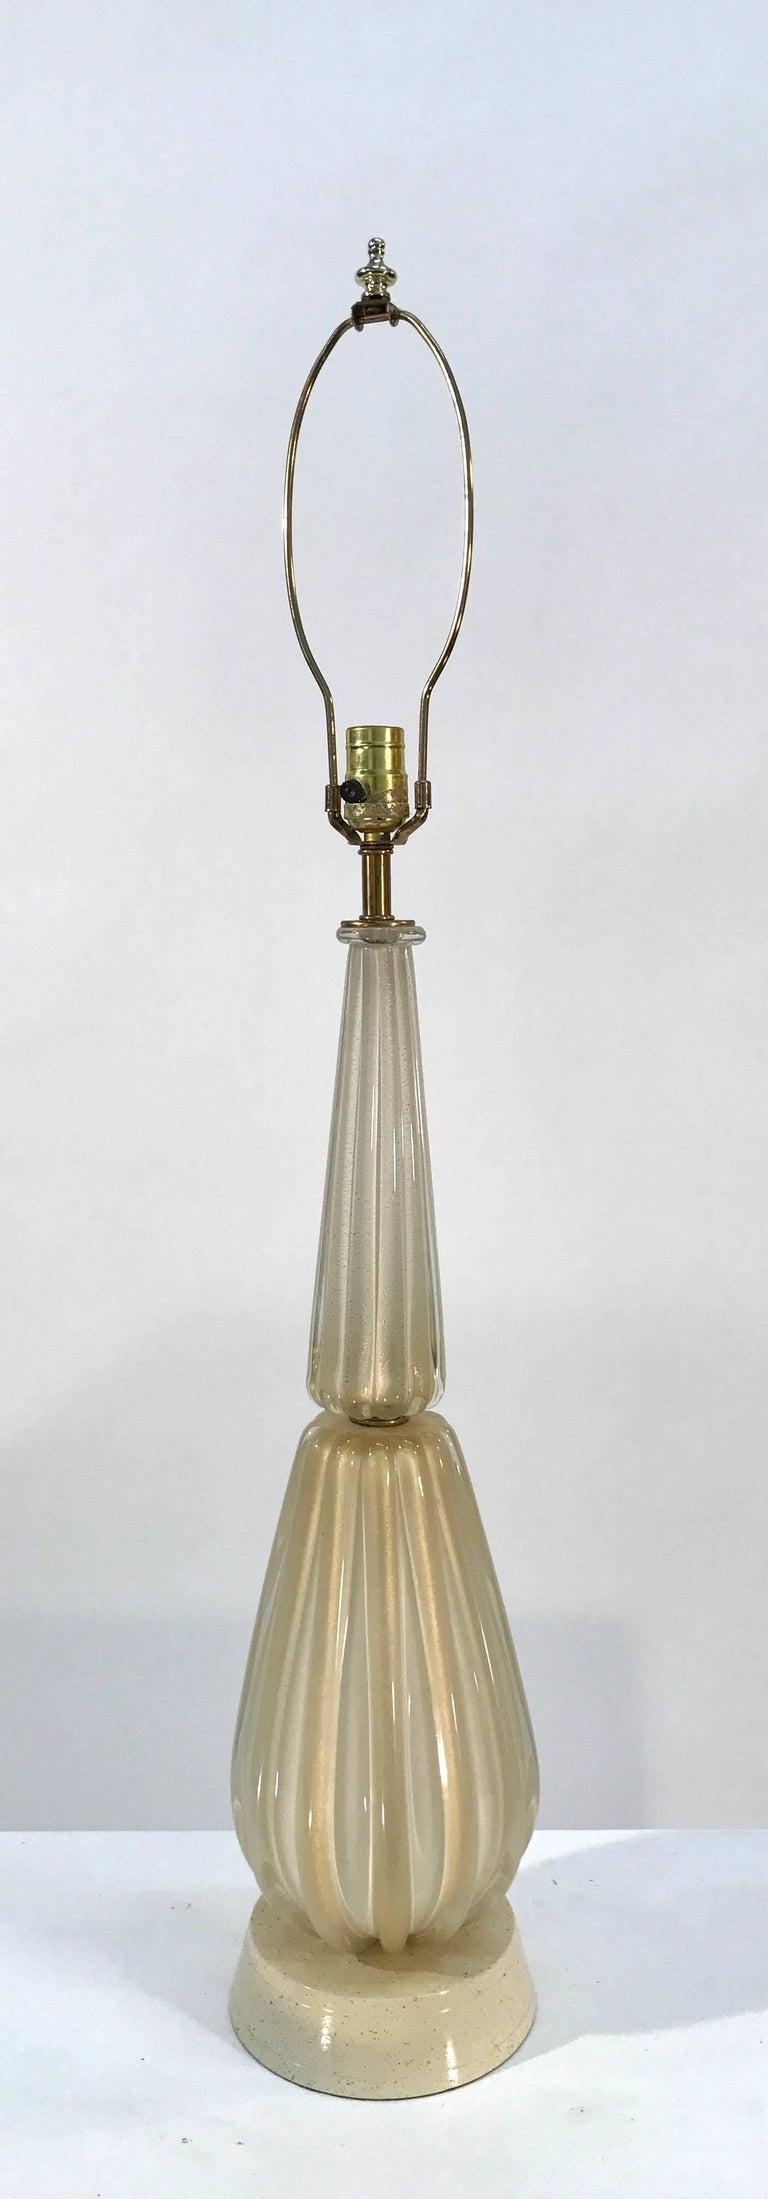 Italian art glass table lamp attributed to Barovier. Measures: 23